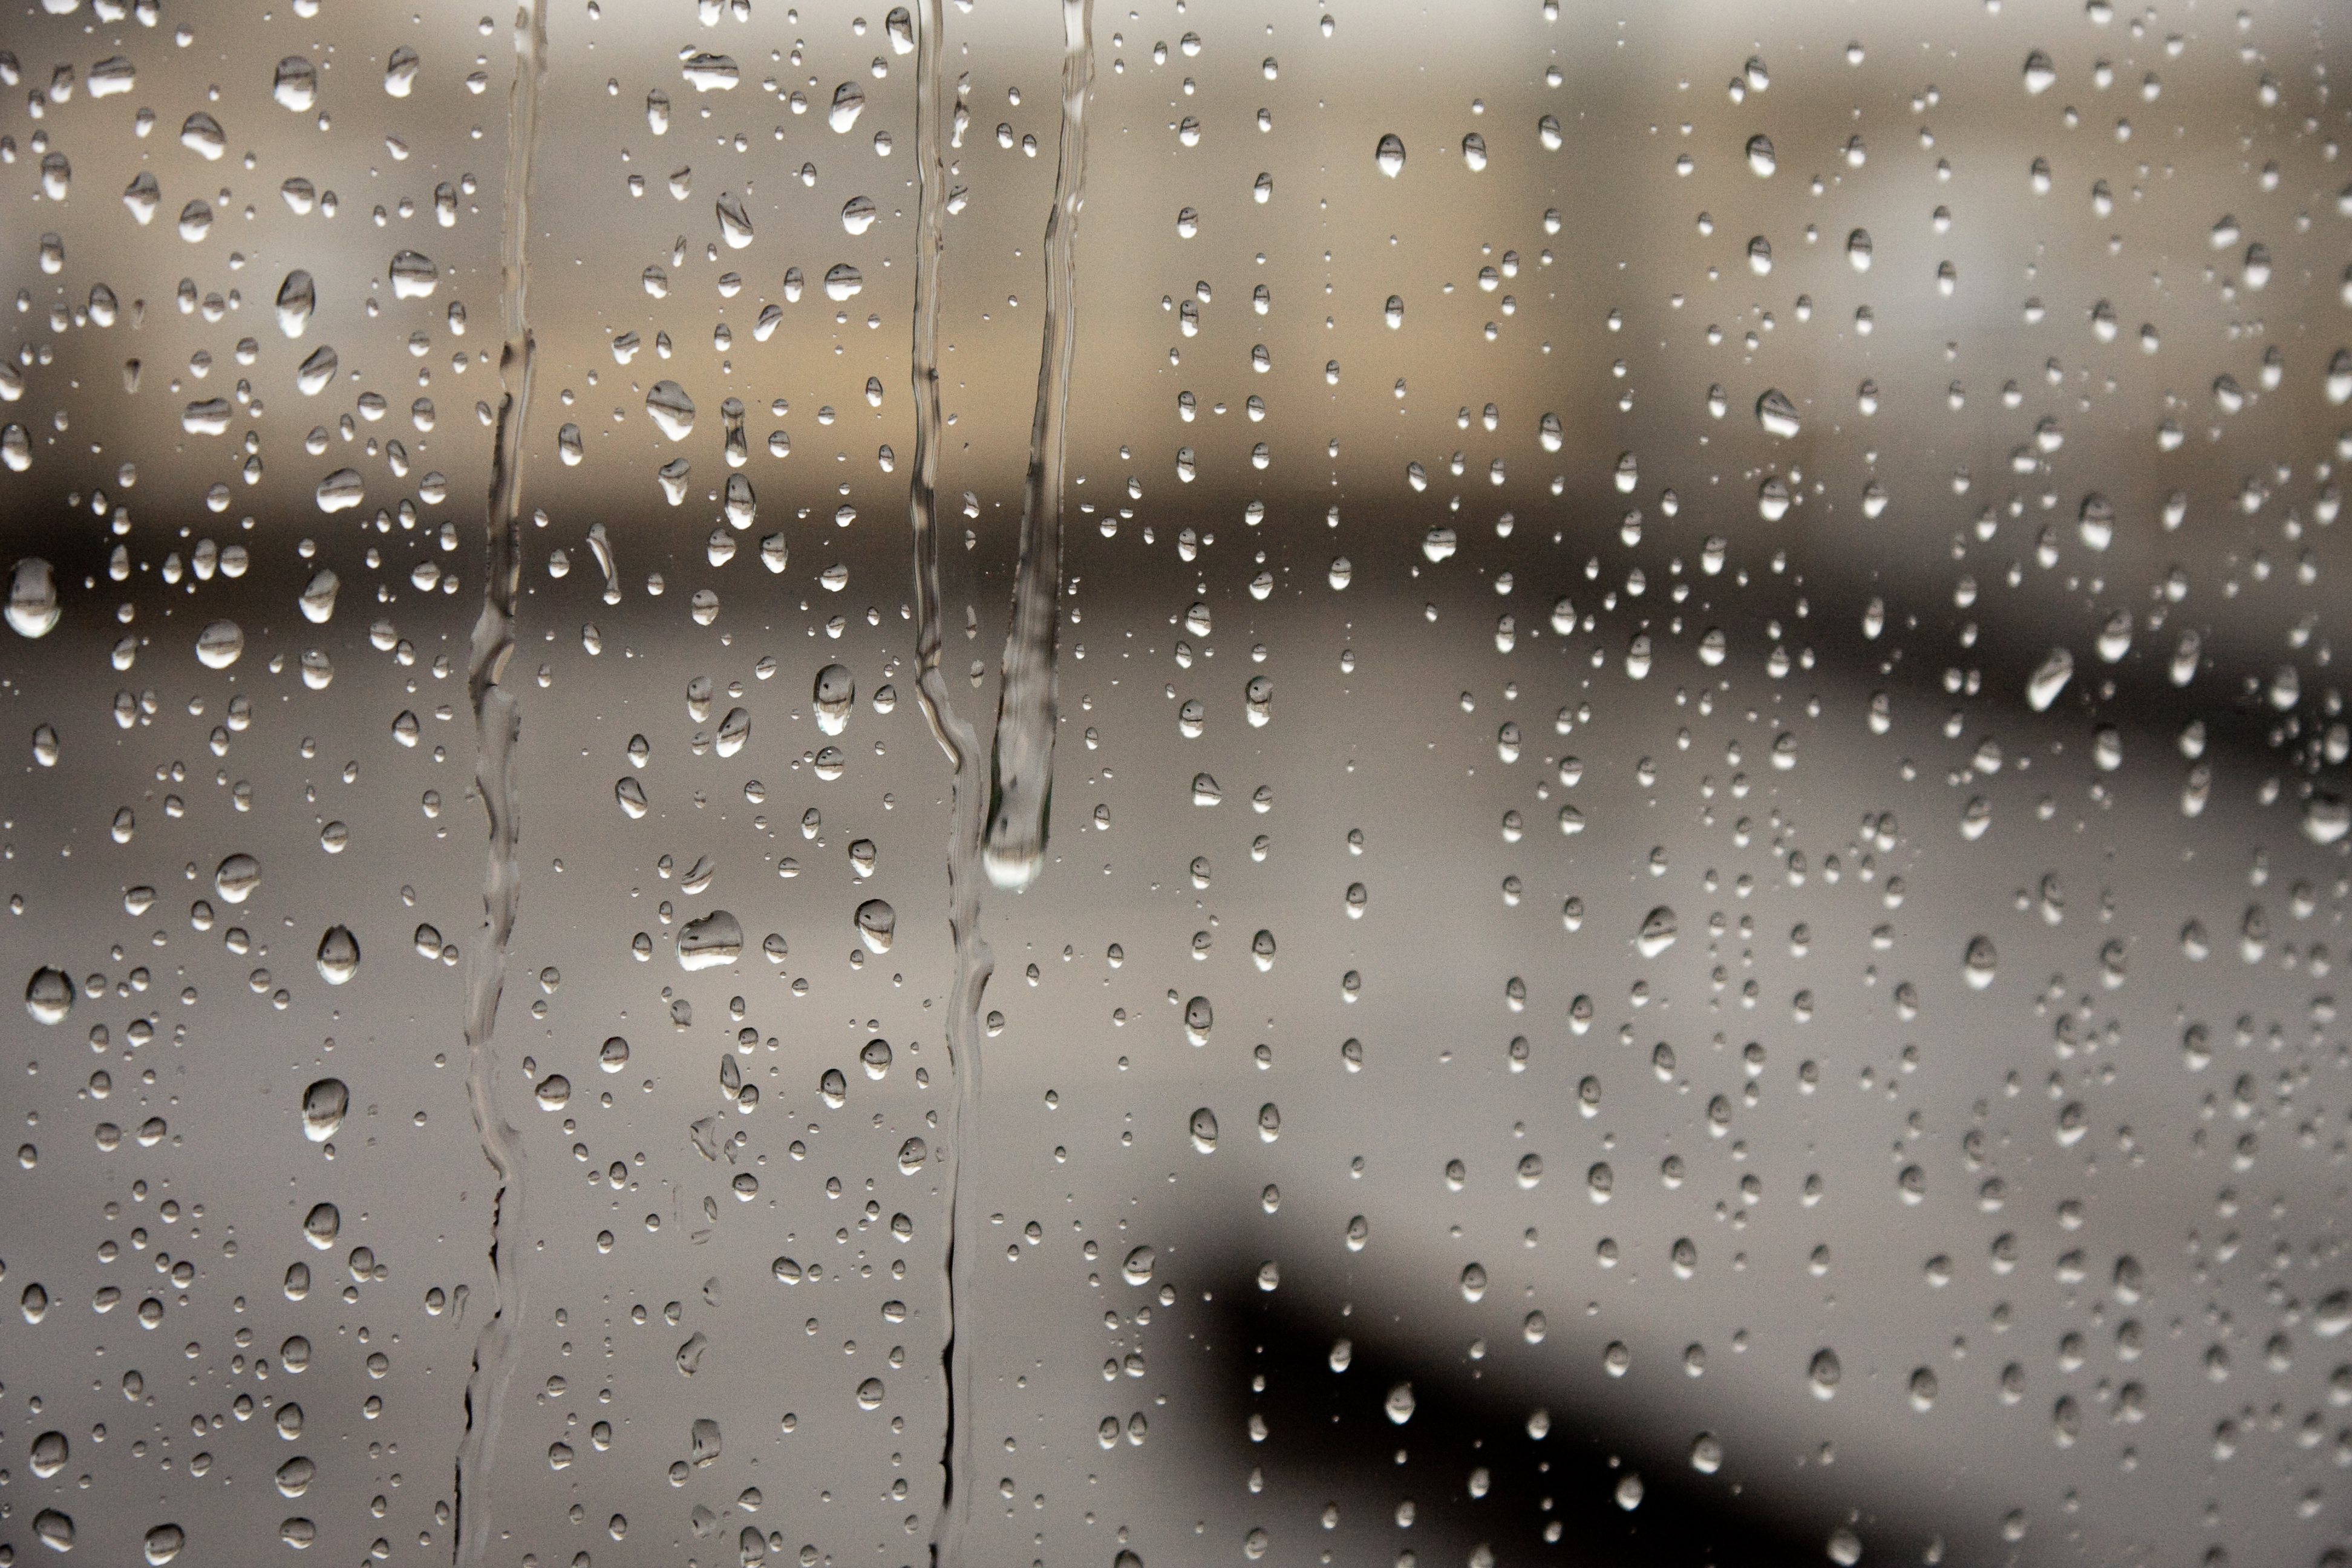 Rain water dripping over a window | photo page - everystockphoto